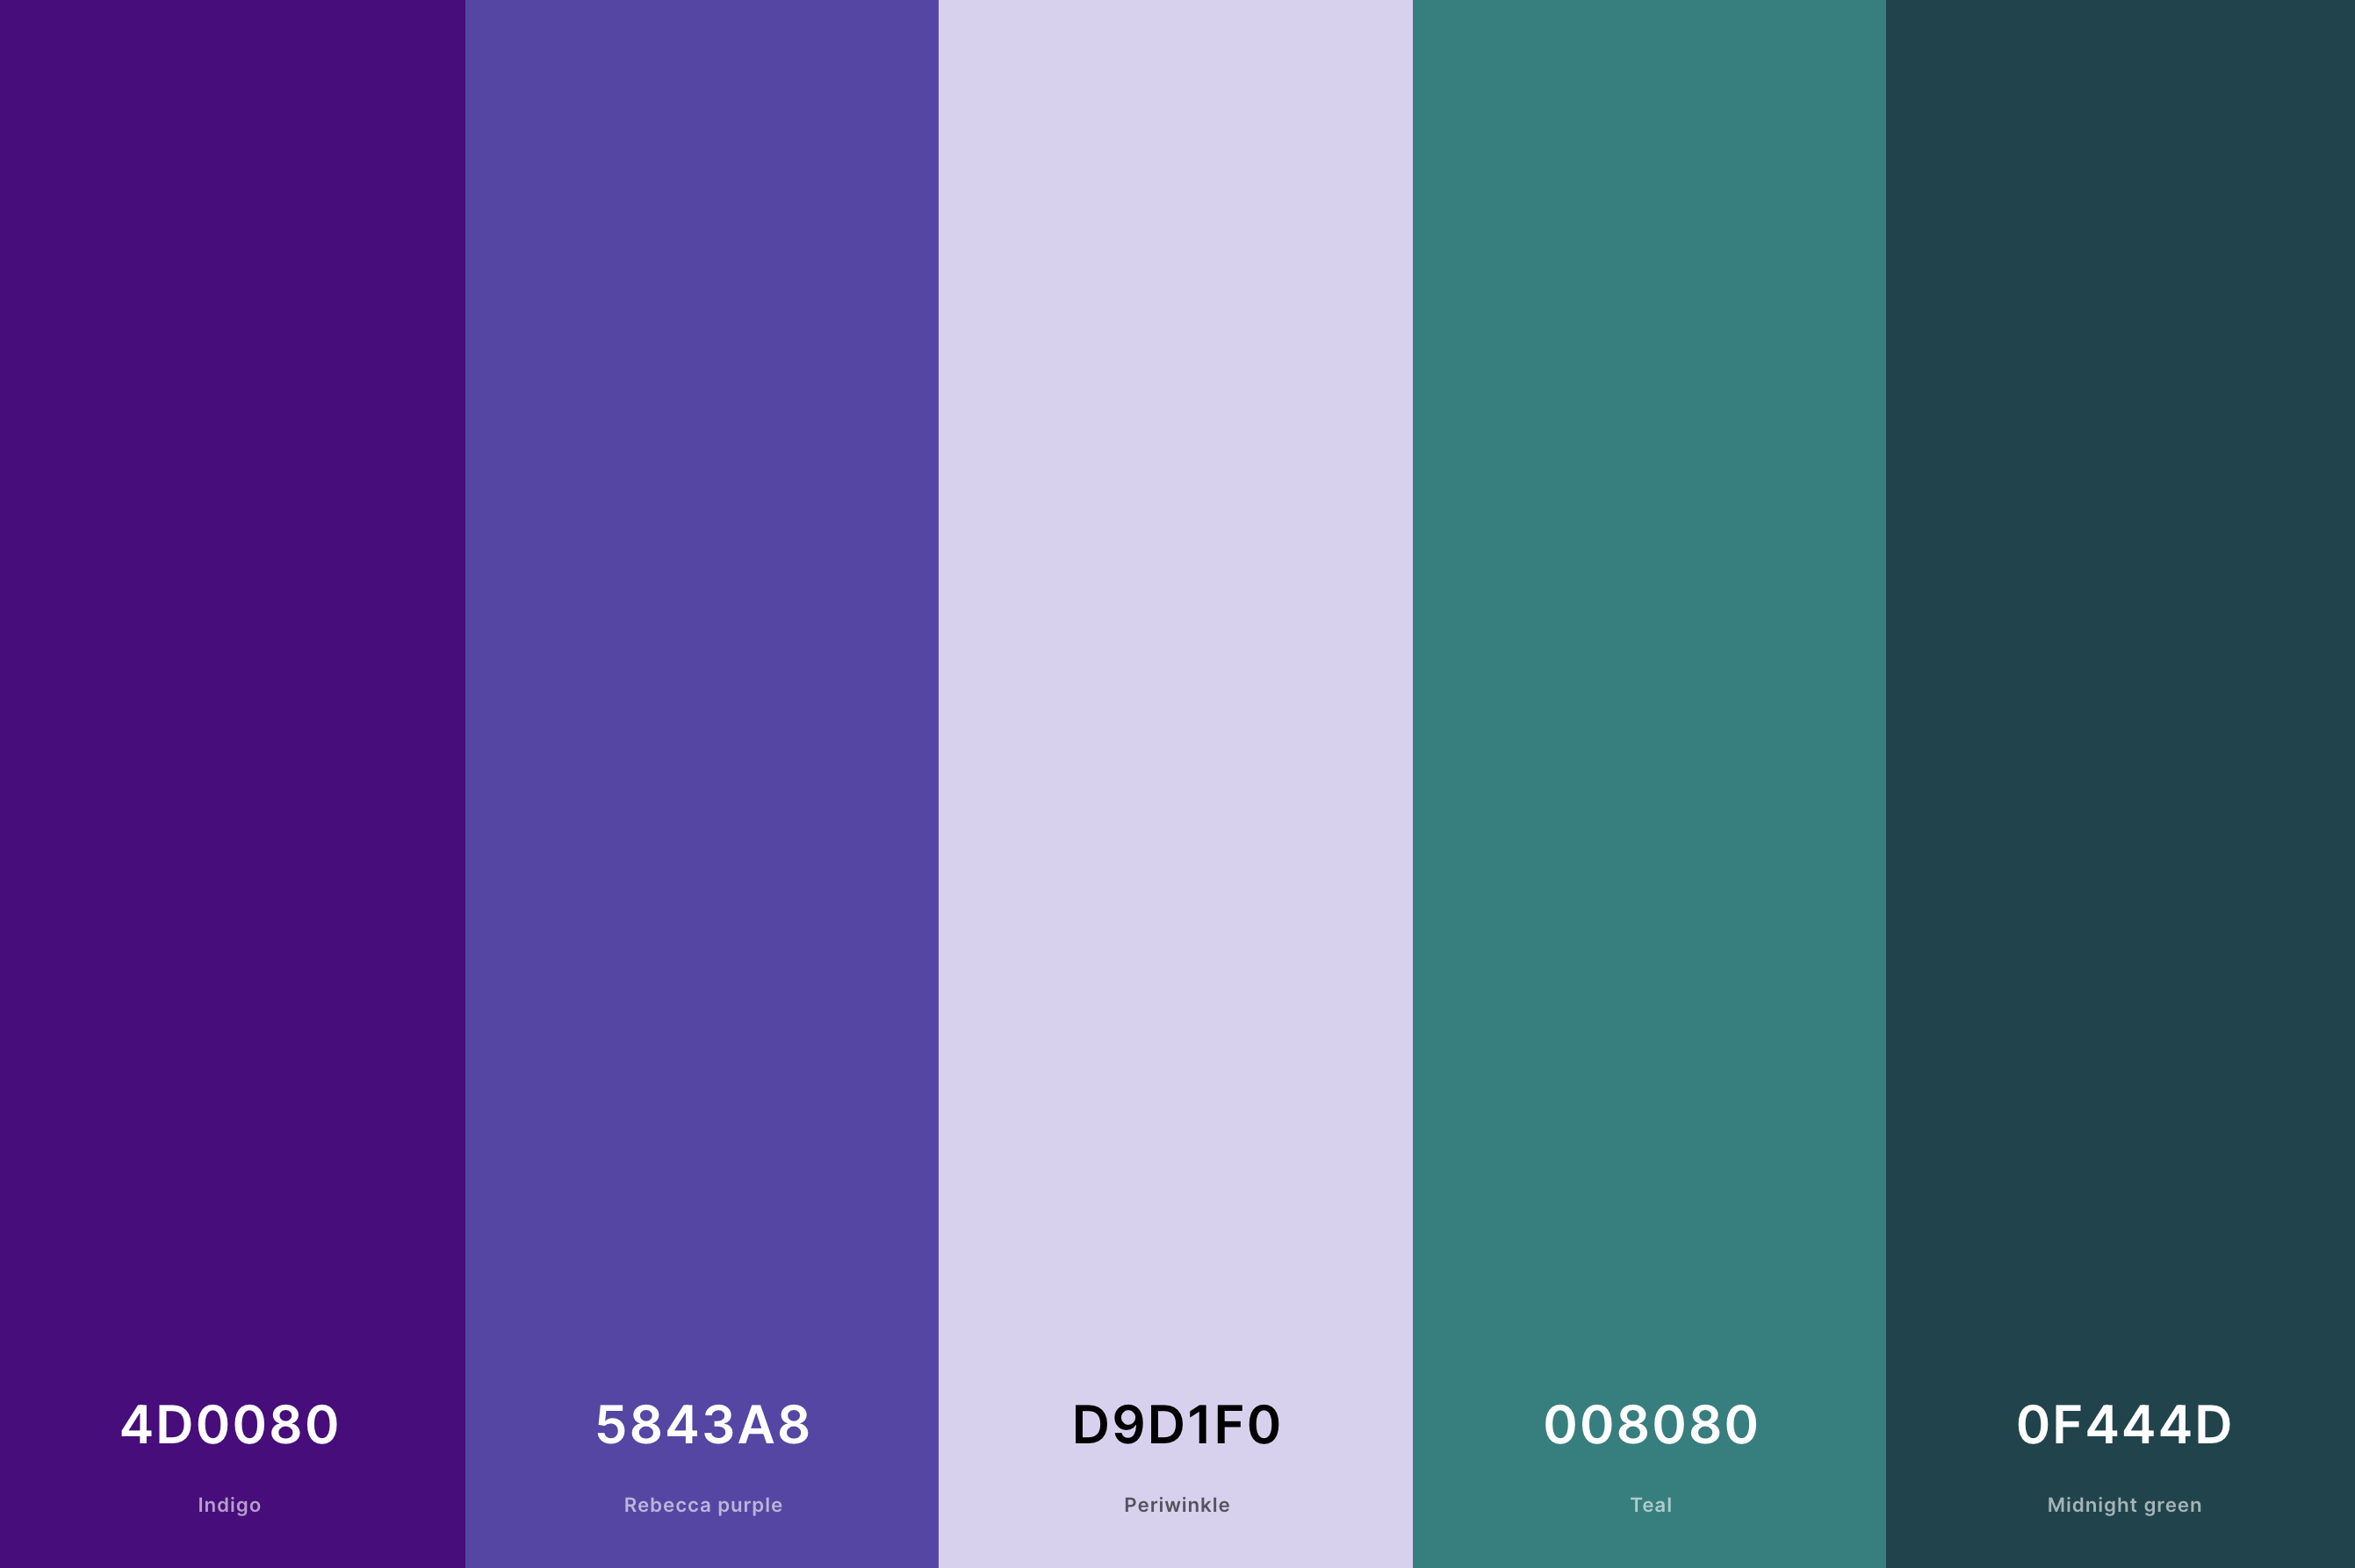 26. Lavender And Teal Color Palette Color Palette with Indigo (Hex #4D0080) + Rebecca Purple (Hex #5843A8) + Periwinkle (Hex #D9D1F0) + Teal (Hex #008080) + Midnight Green (Hex #0F444D) Color Palette with Hex Codes